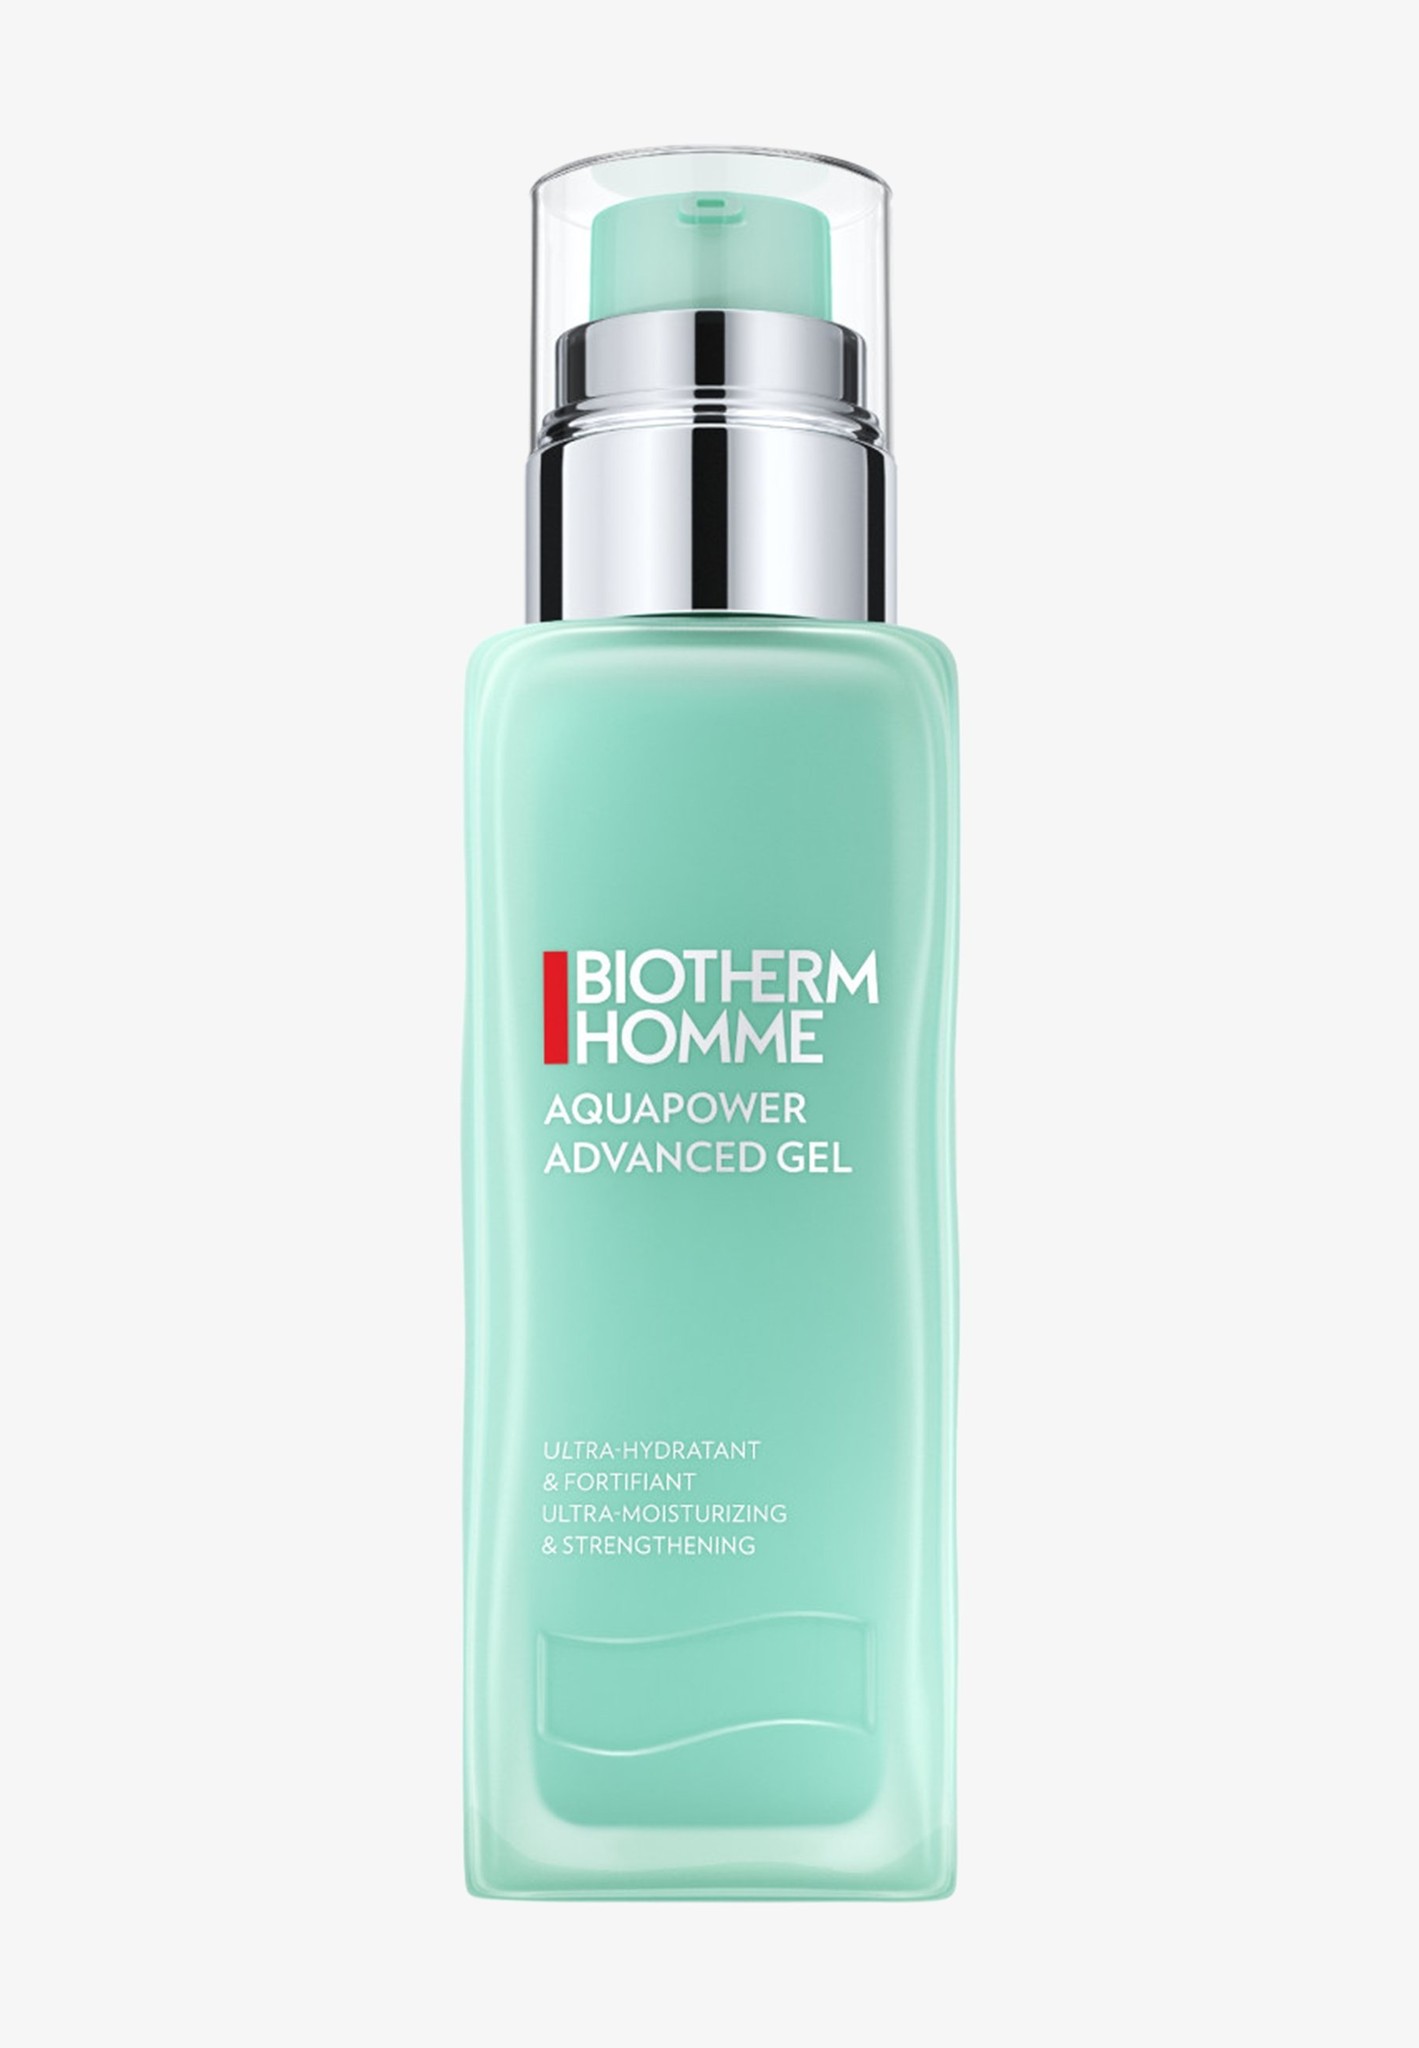 Biotherm Homme Aquapower Advanced Gel - Tagescreme 75ml